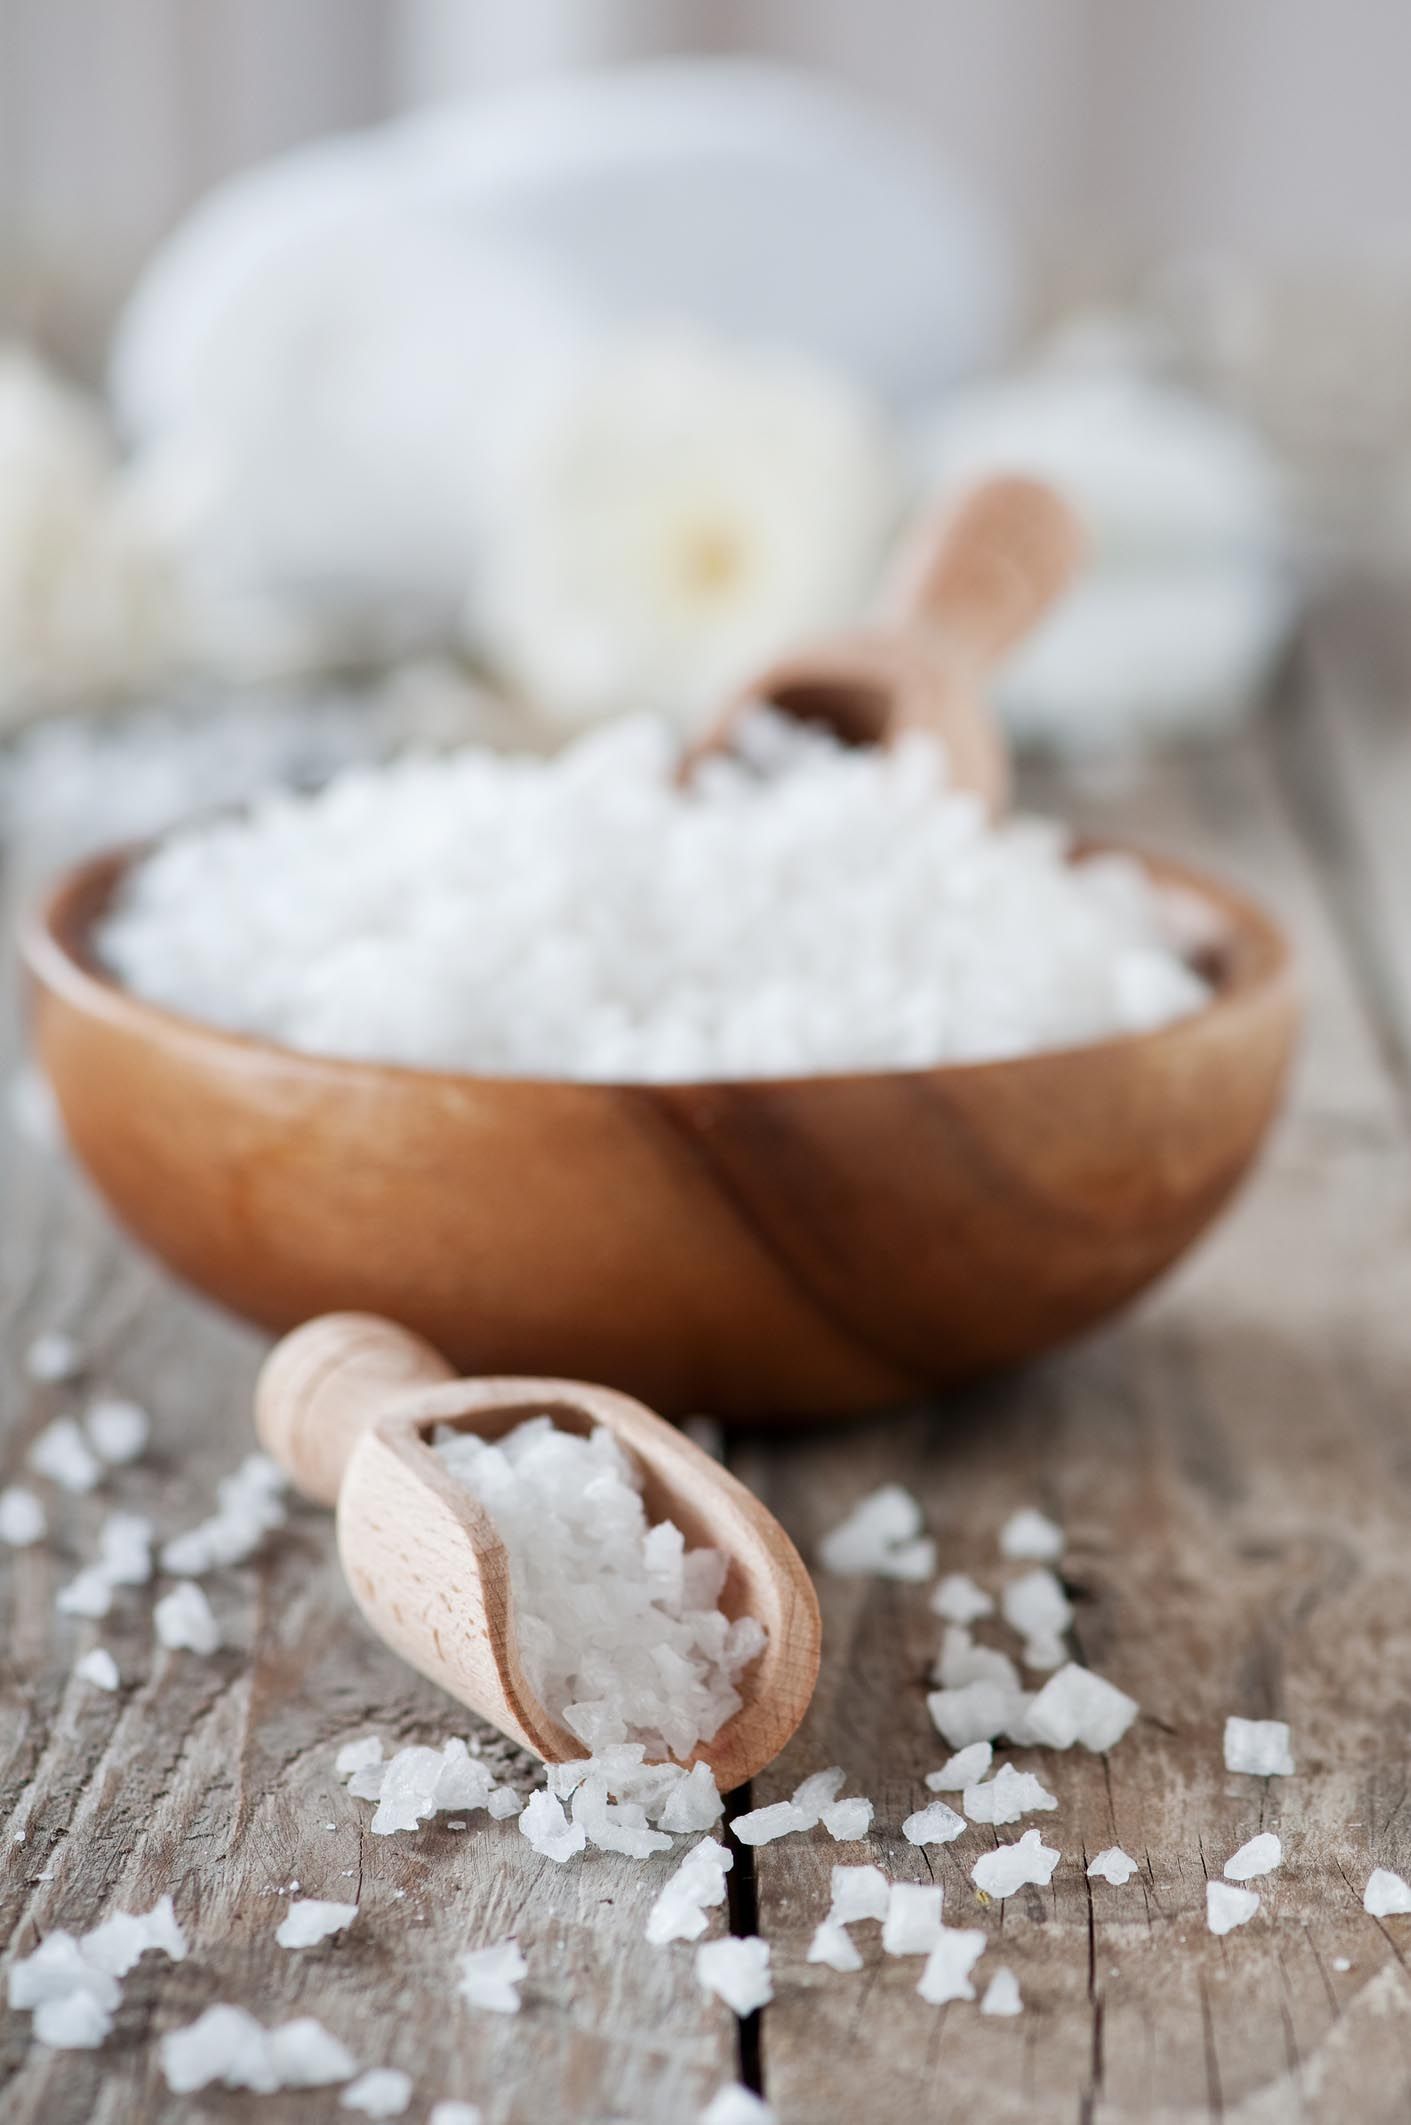 Sea Salt Benefits for Skin and Hair